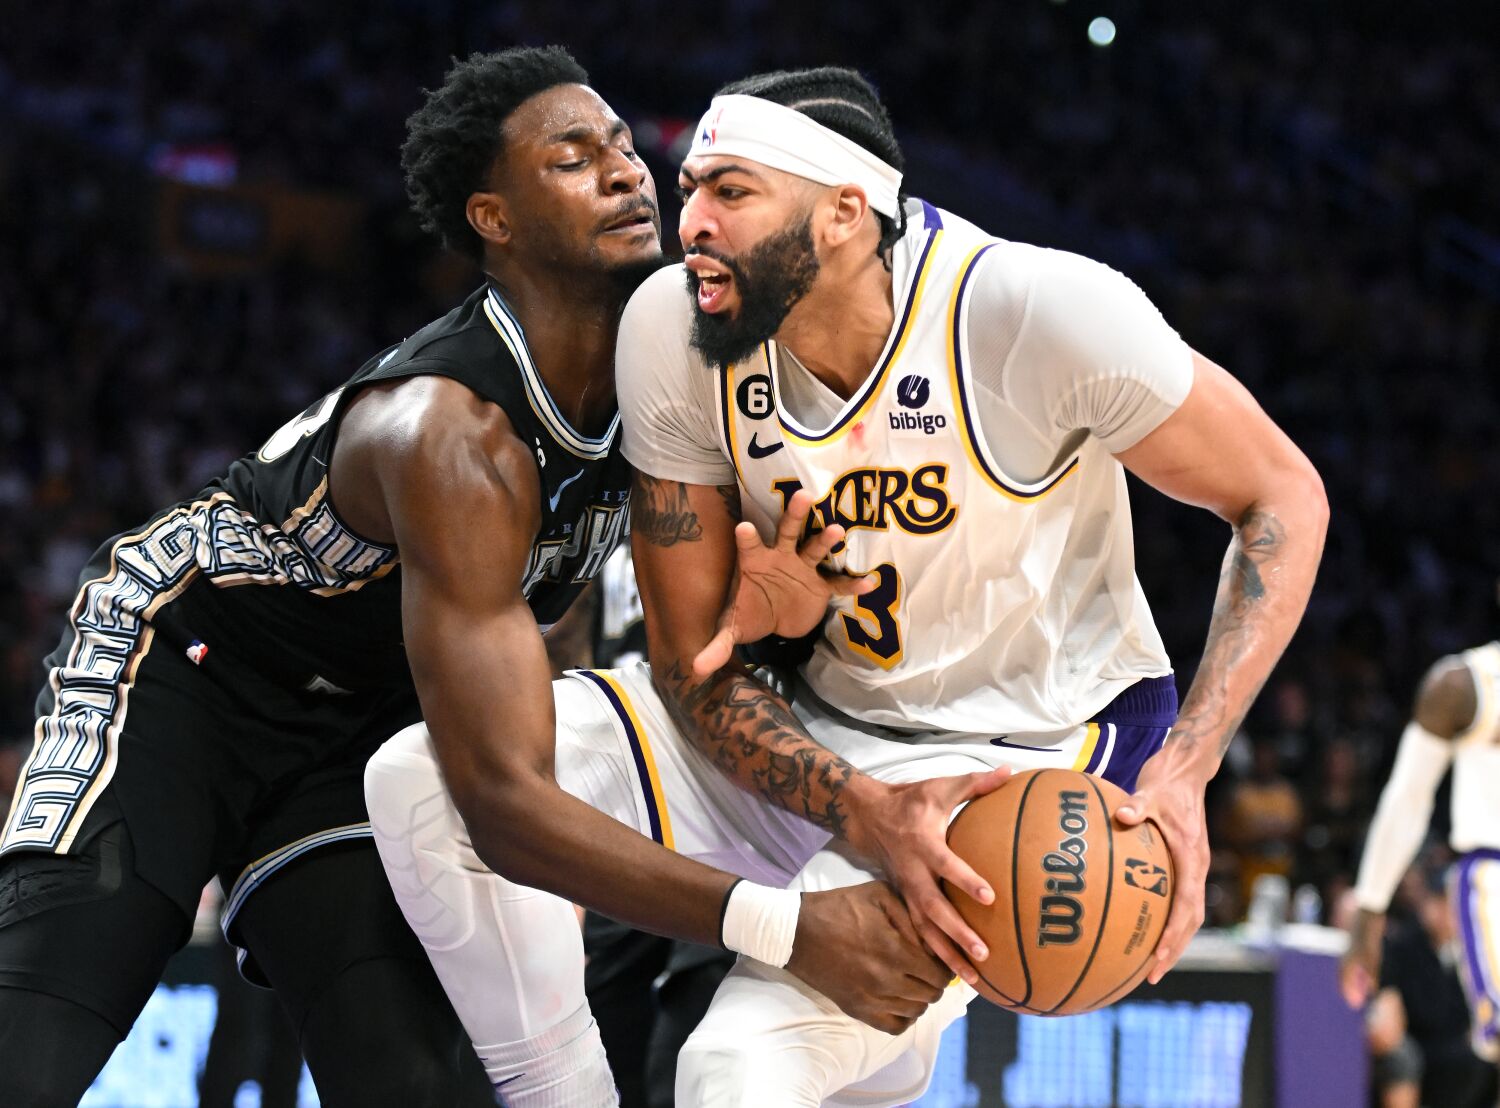 Anthony Davis and Lakers take command early in Game 3 victory over Grizzlies